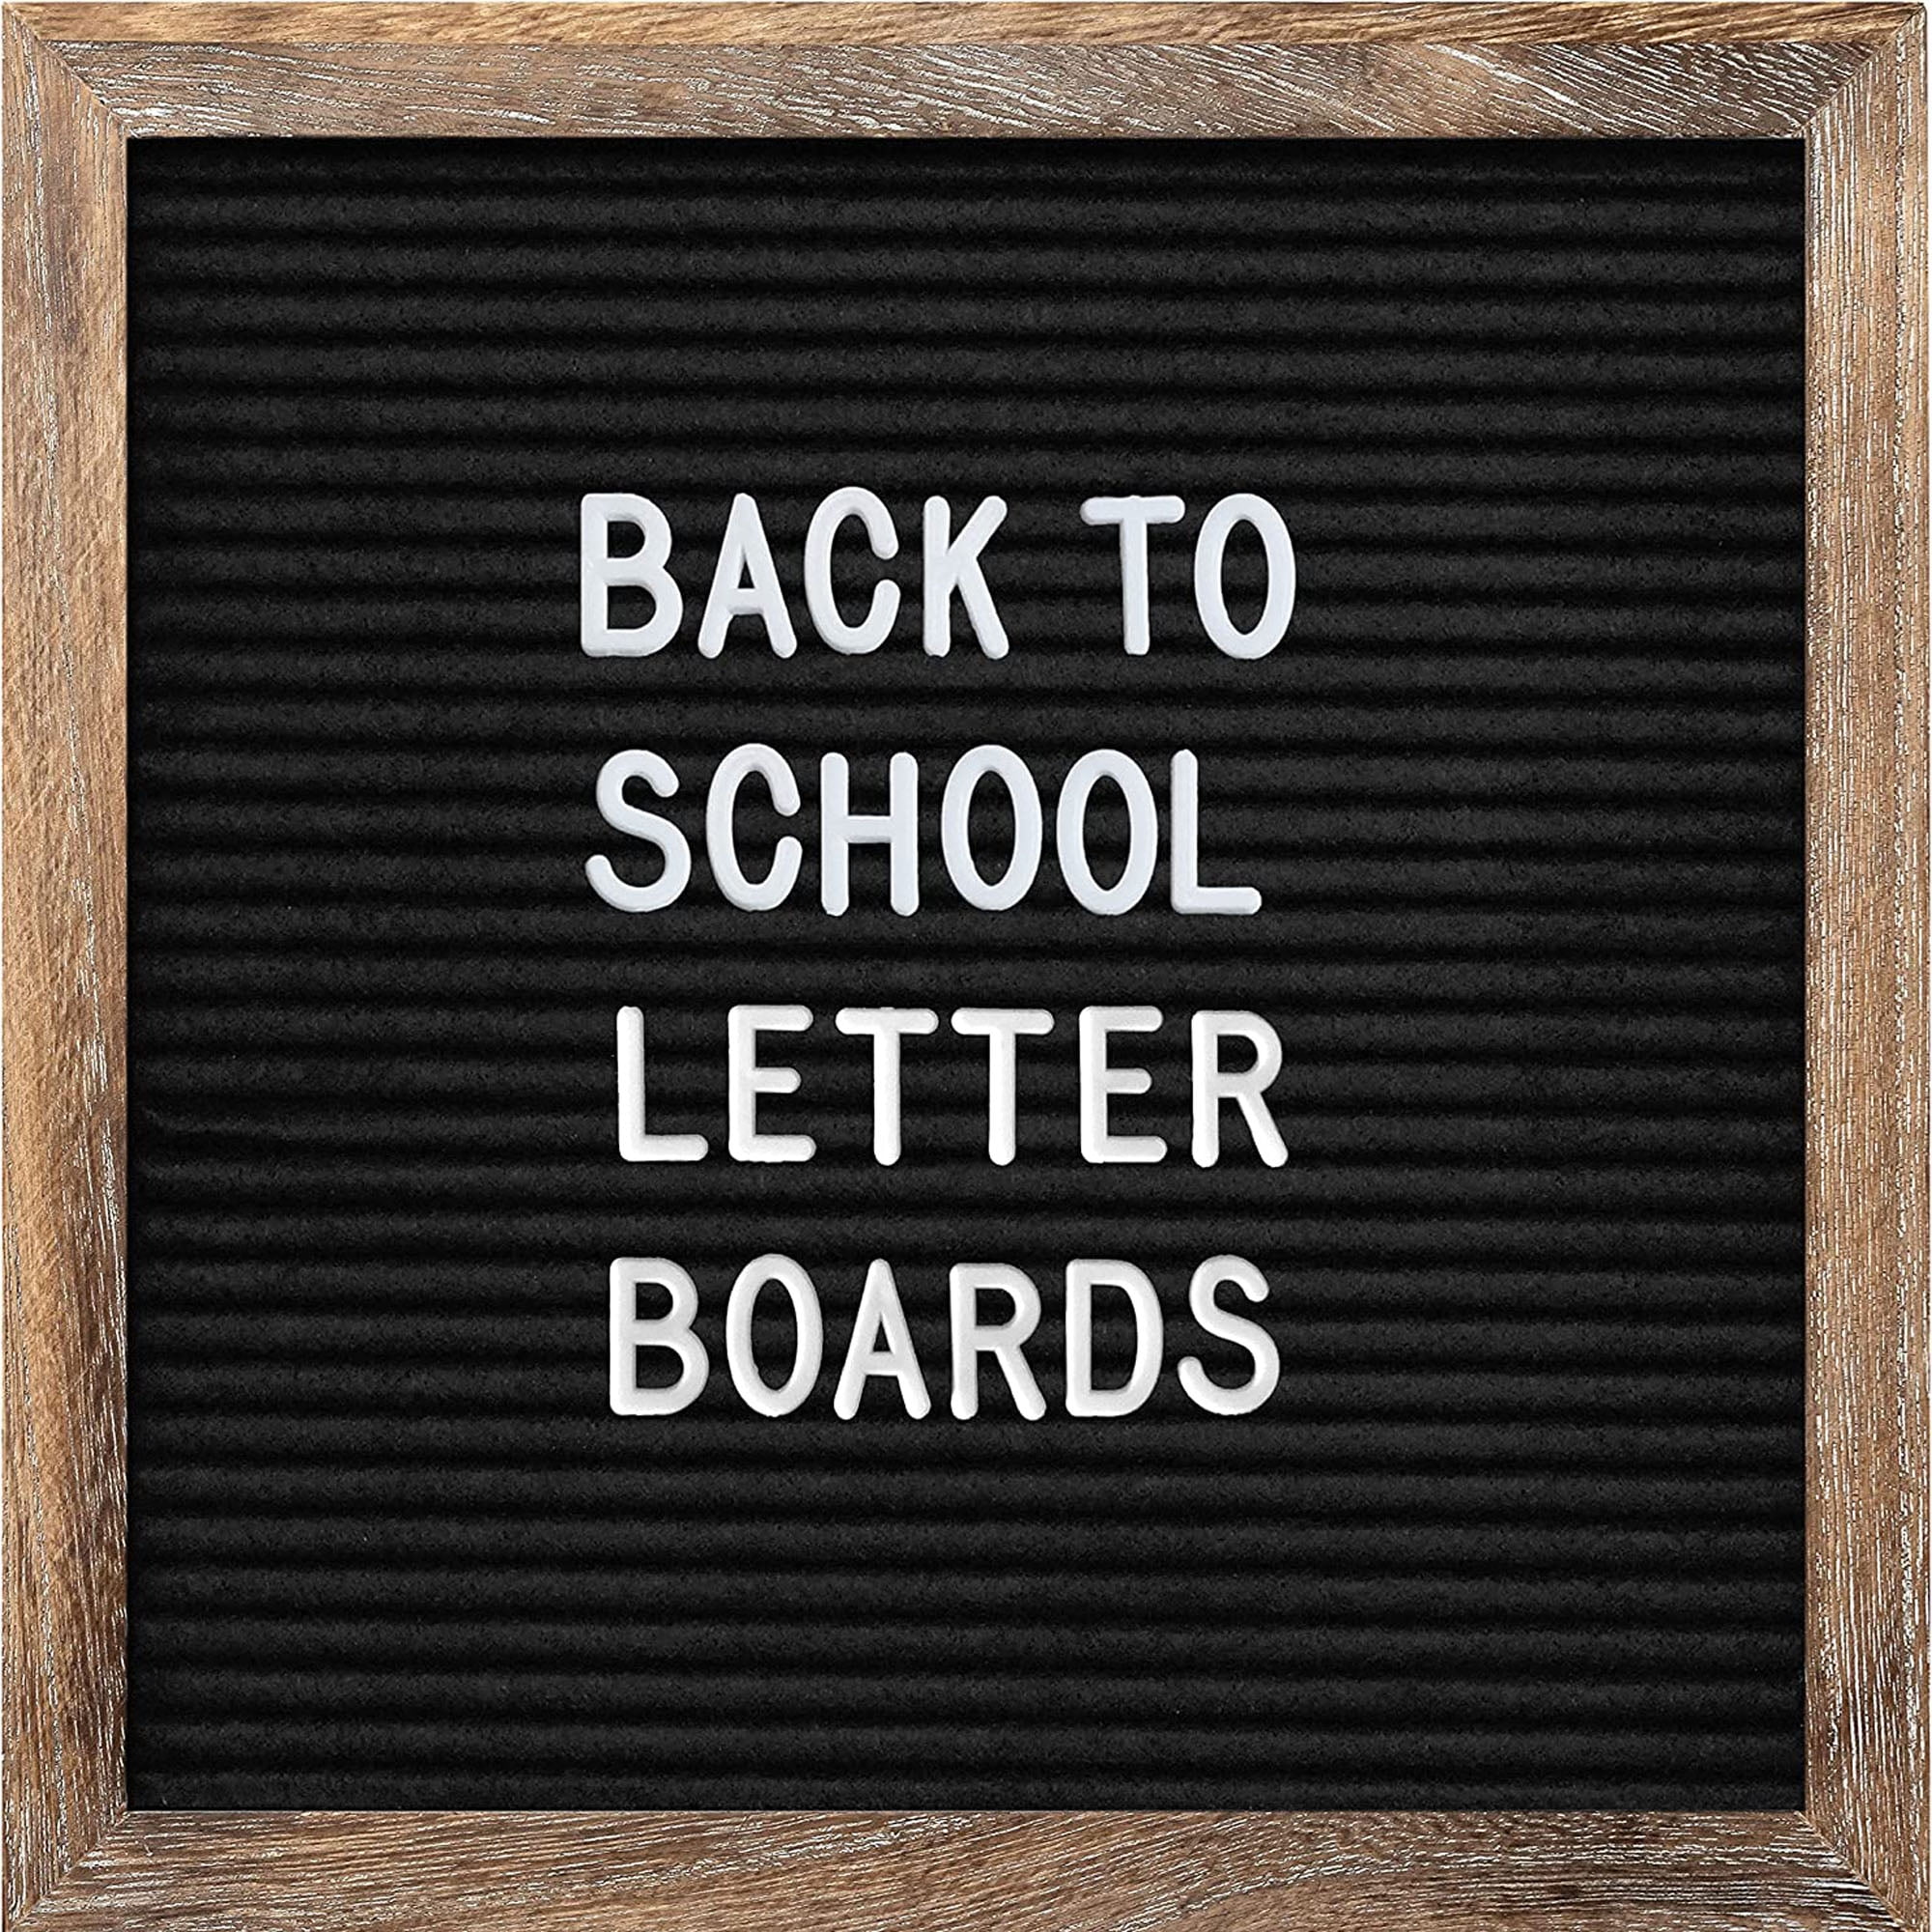 Patriotic Bulletin Board Letters - Mixed-Up Files